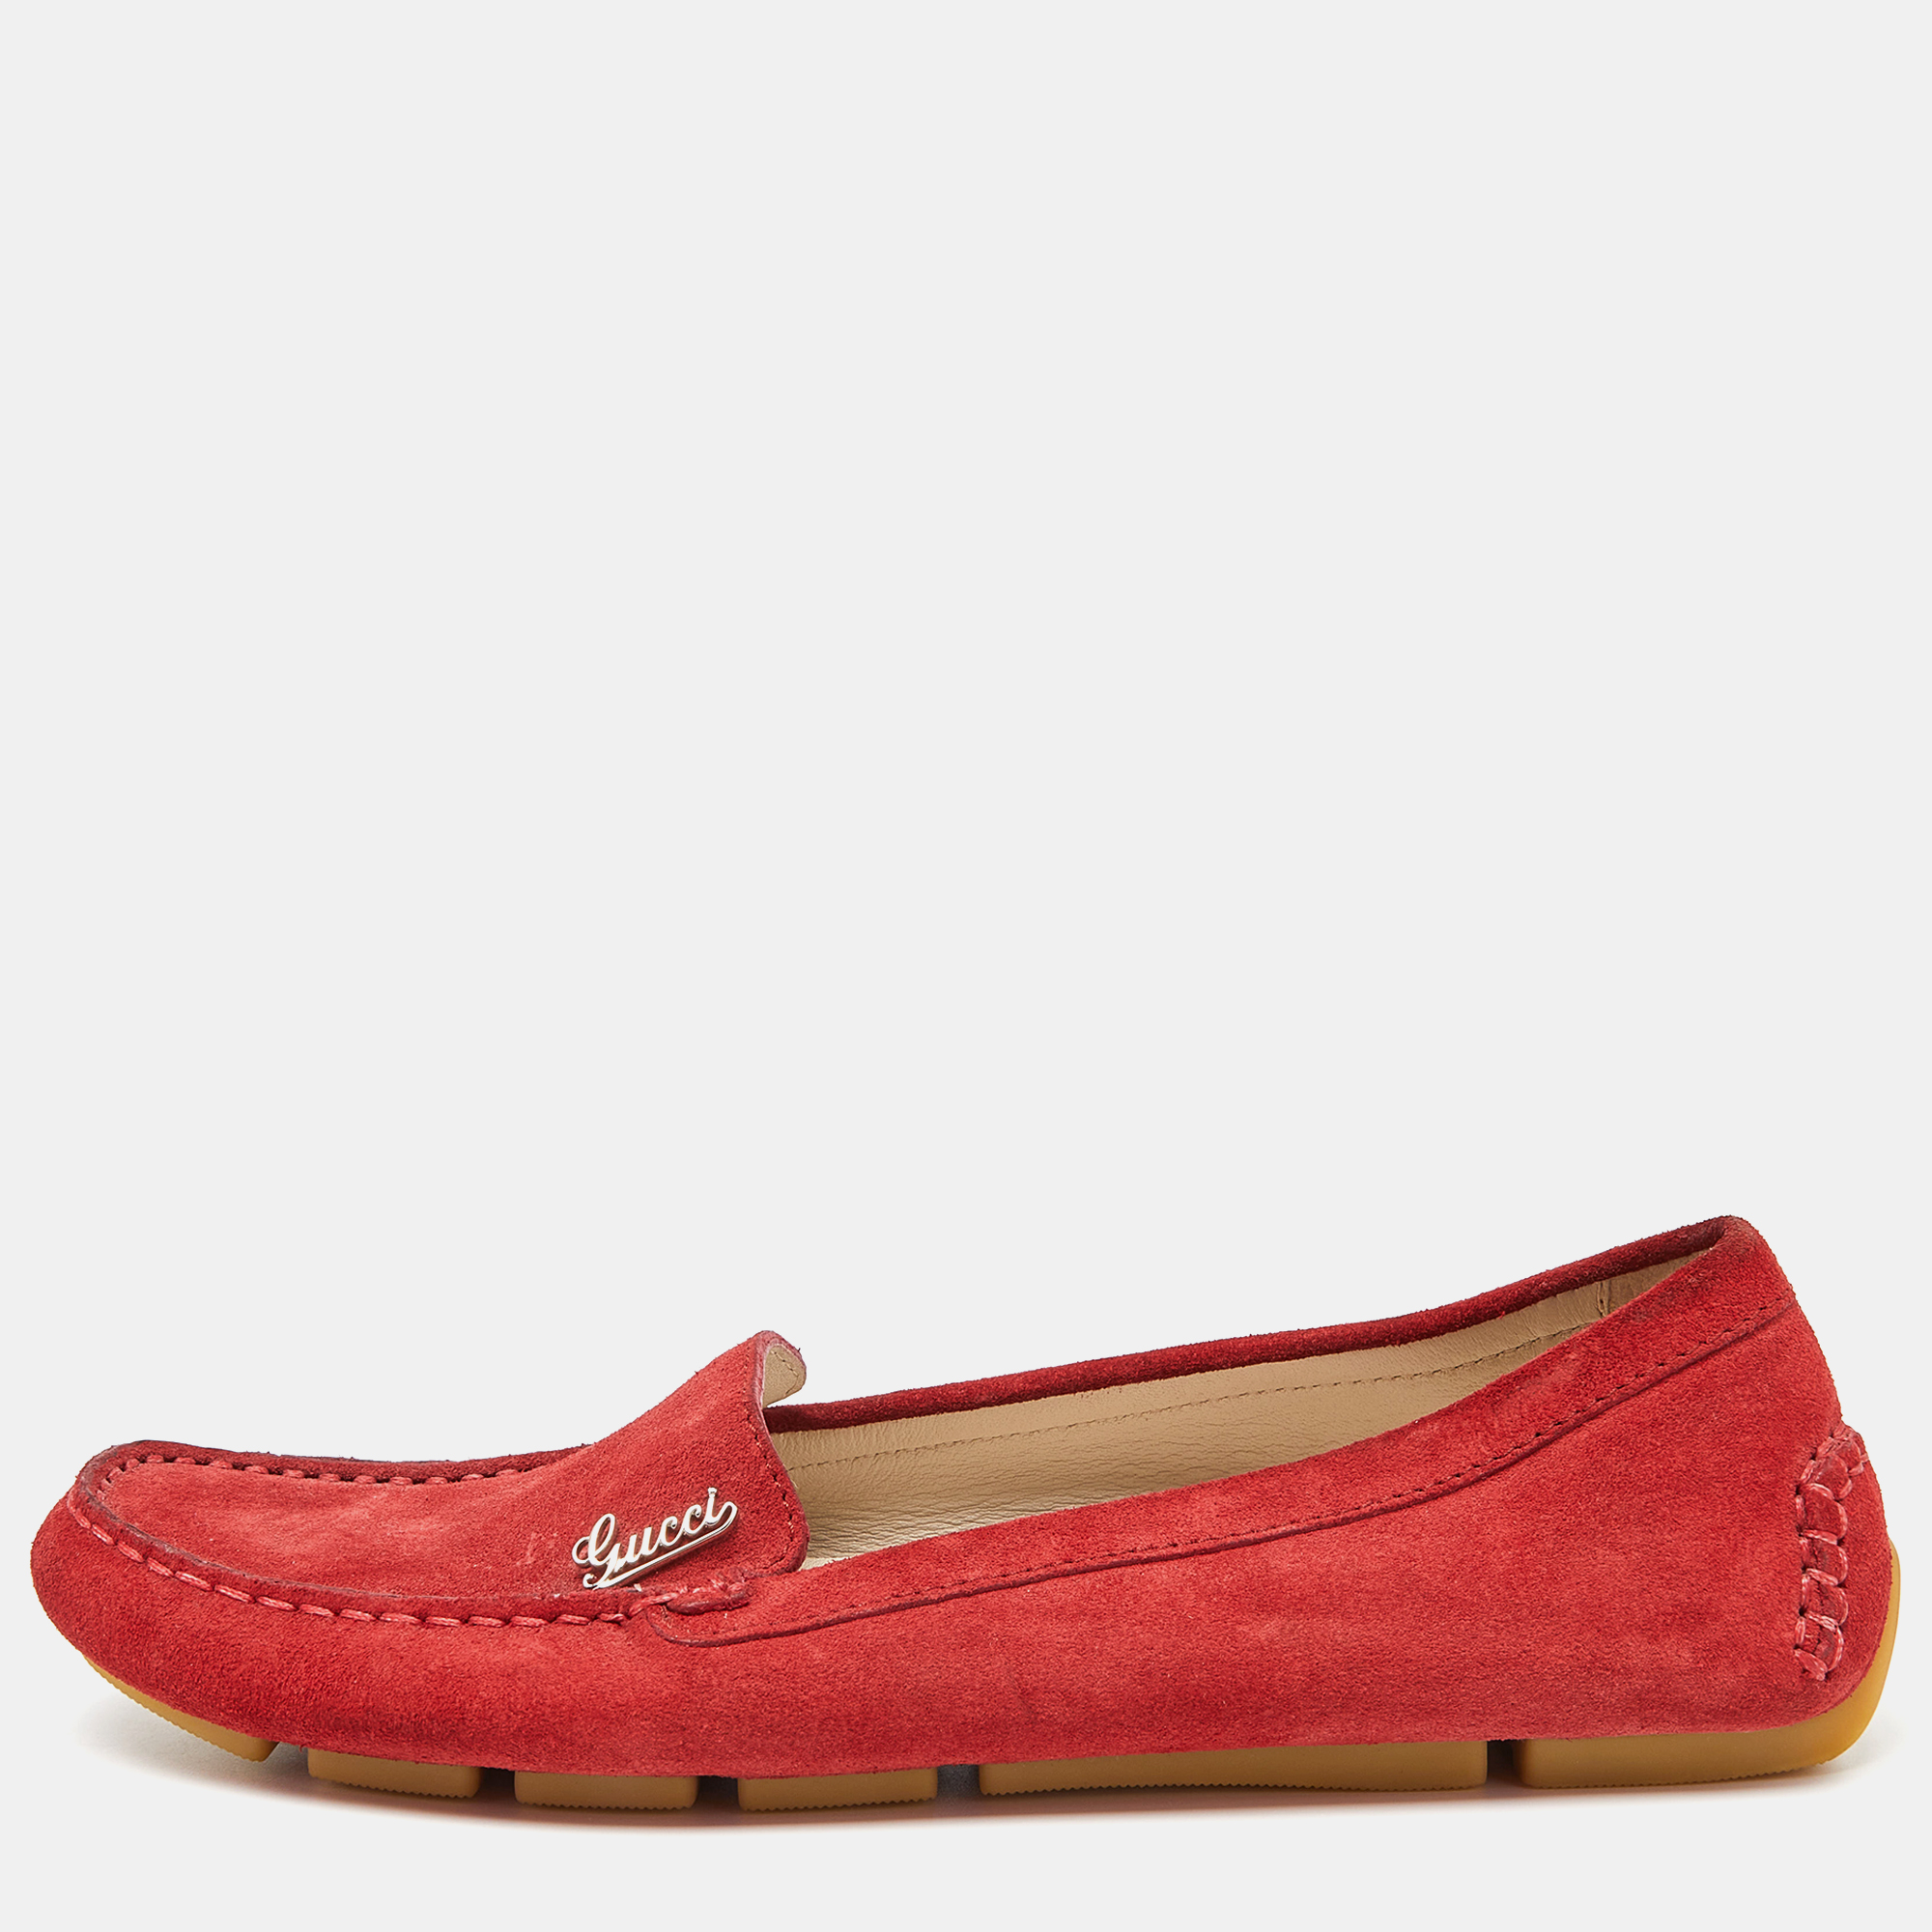 Pre-owned Gucci Red Suede Slip On Loafers Size 36